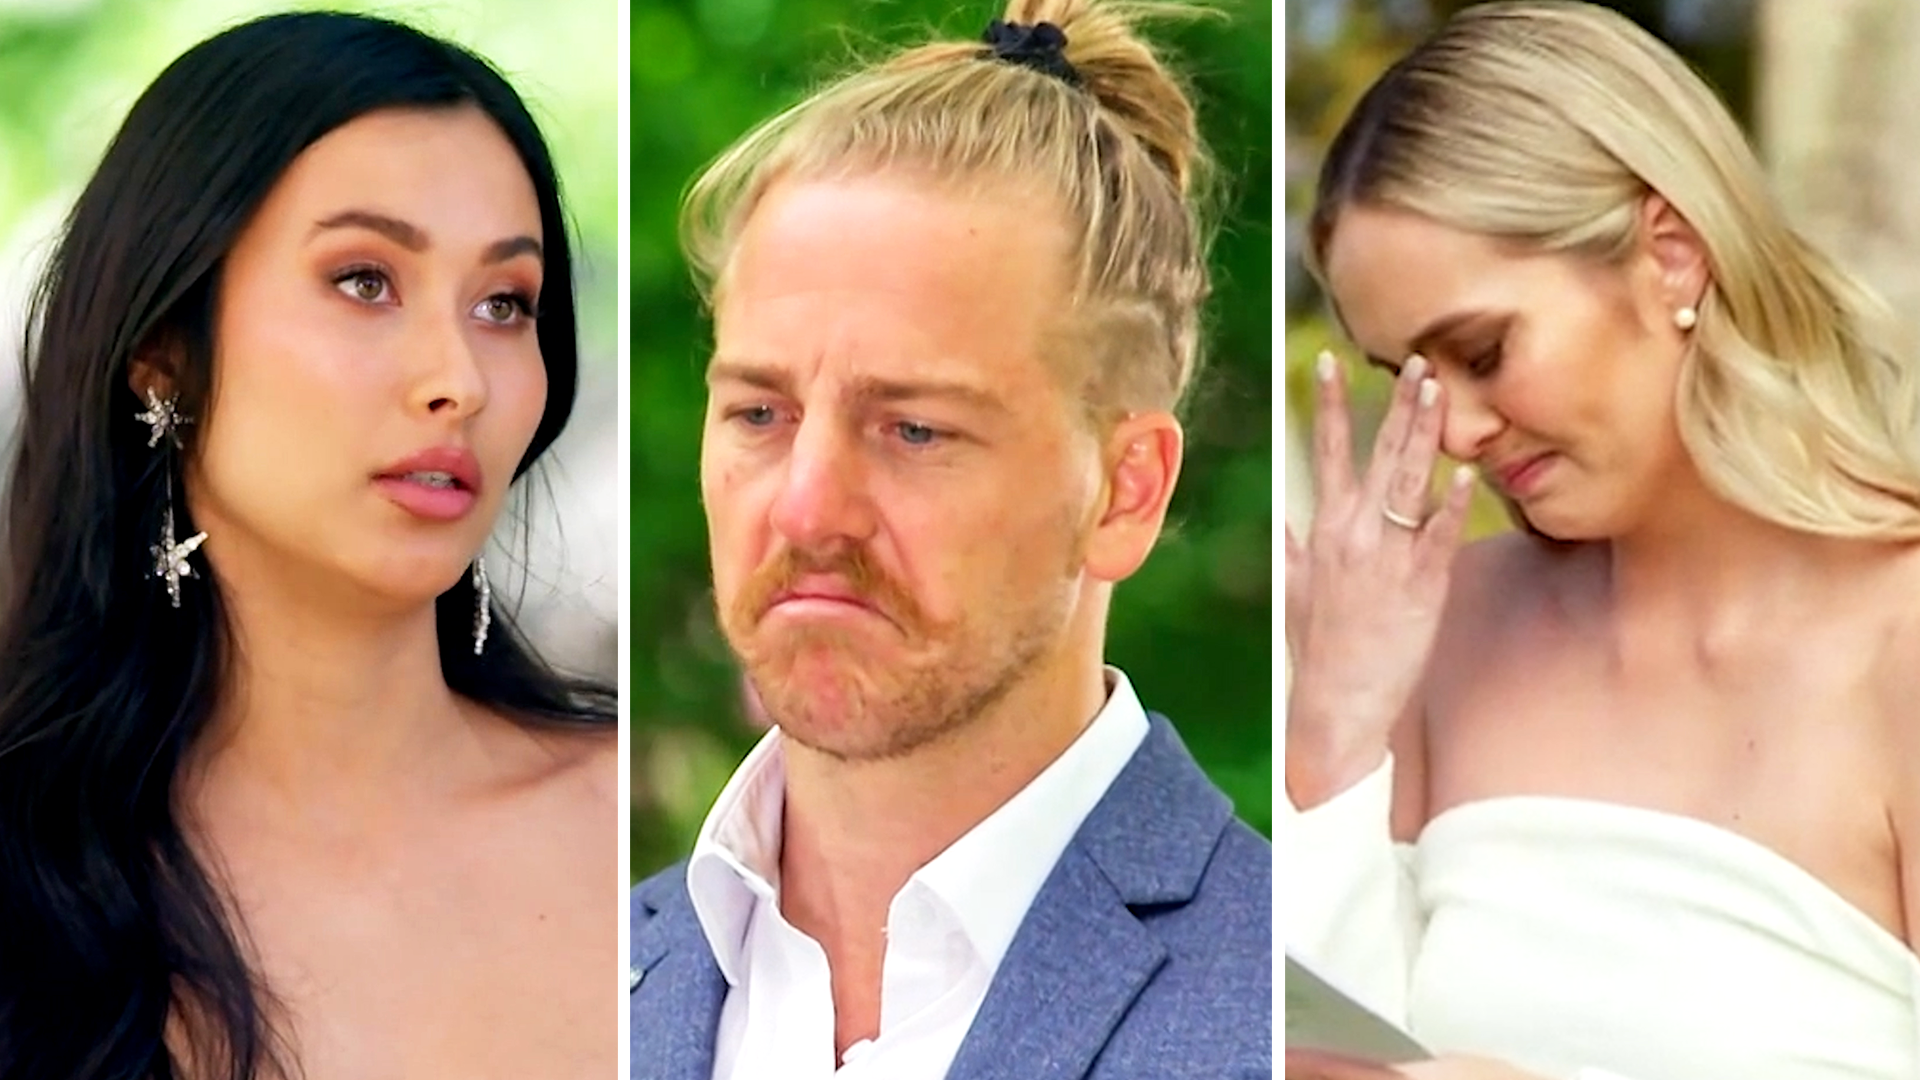 Episode 34 Recap: One groom storms off during Final Vows